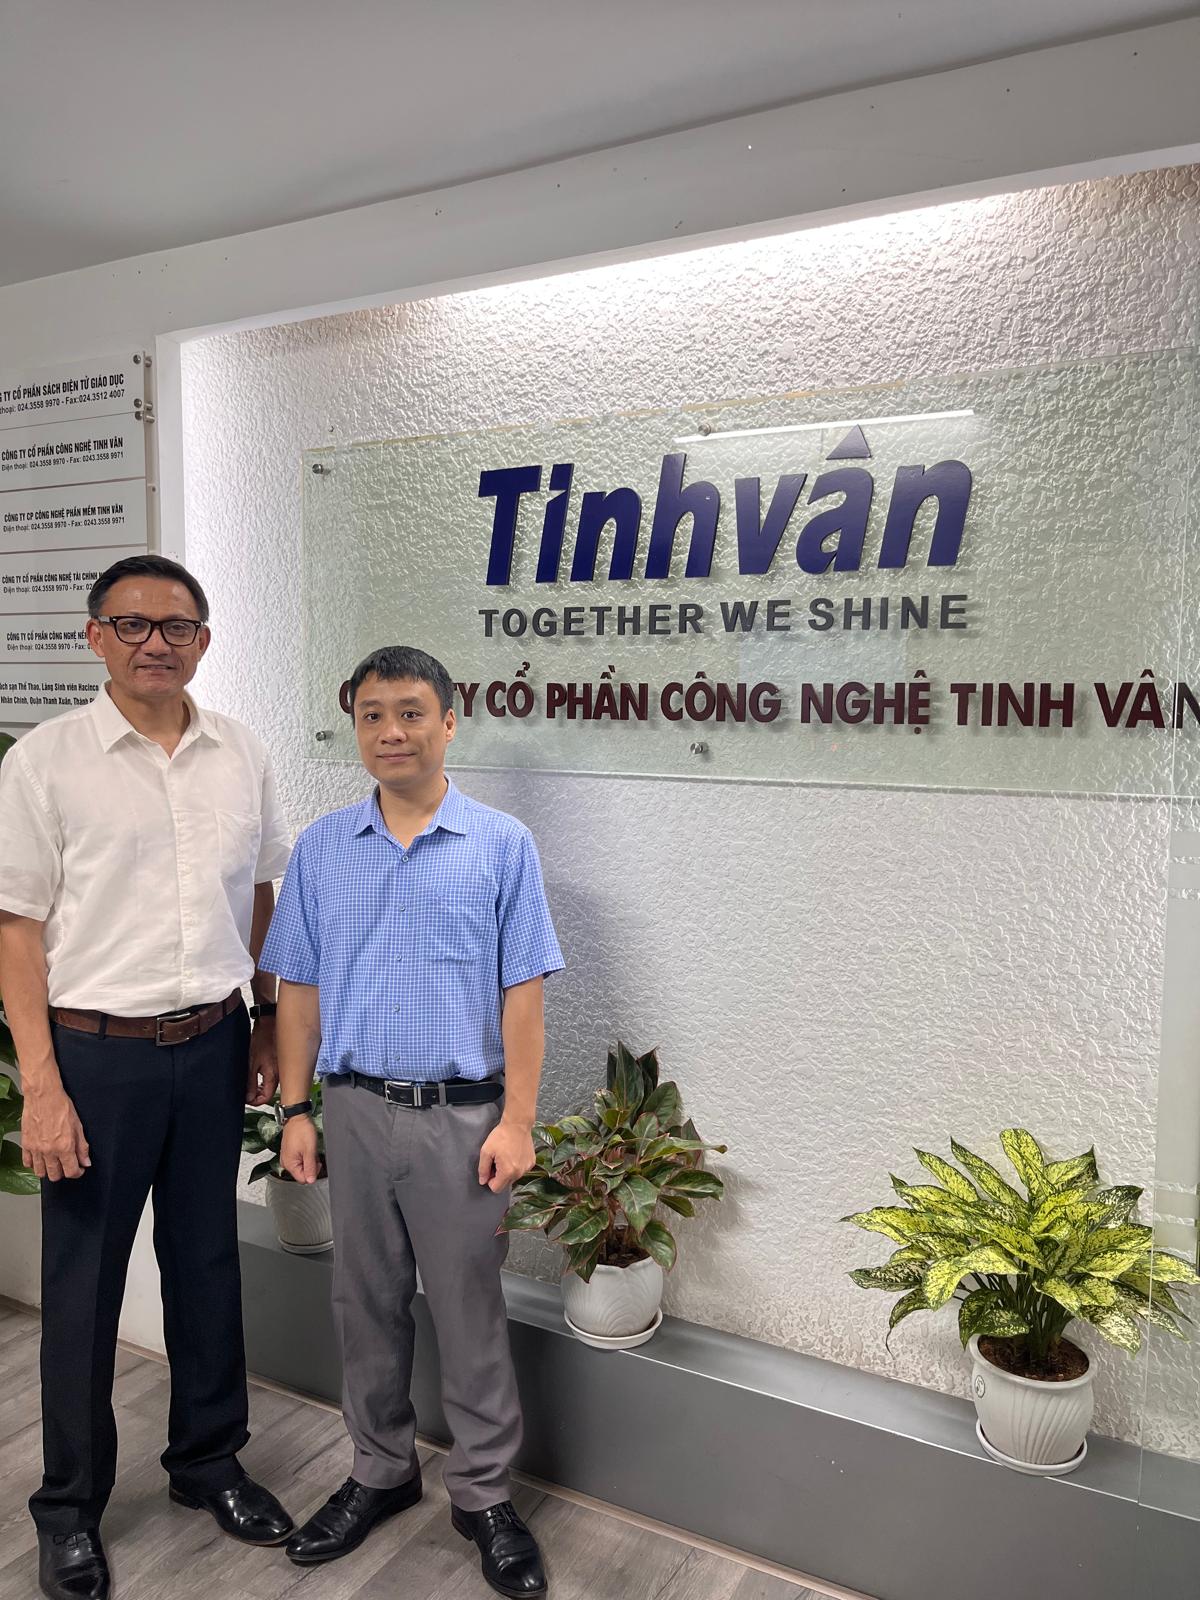 Representatives from Tescom Visit the Headquarters of Tinhvan Software in Hanoi